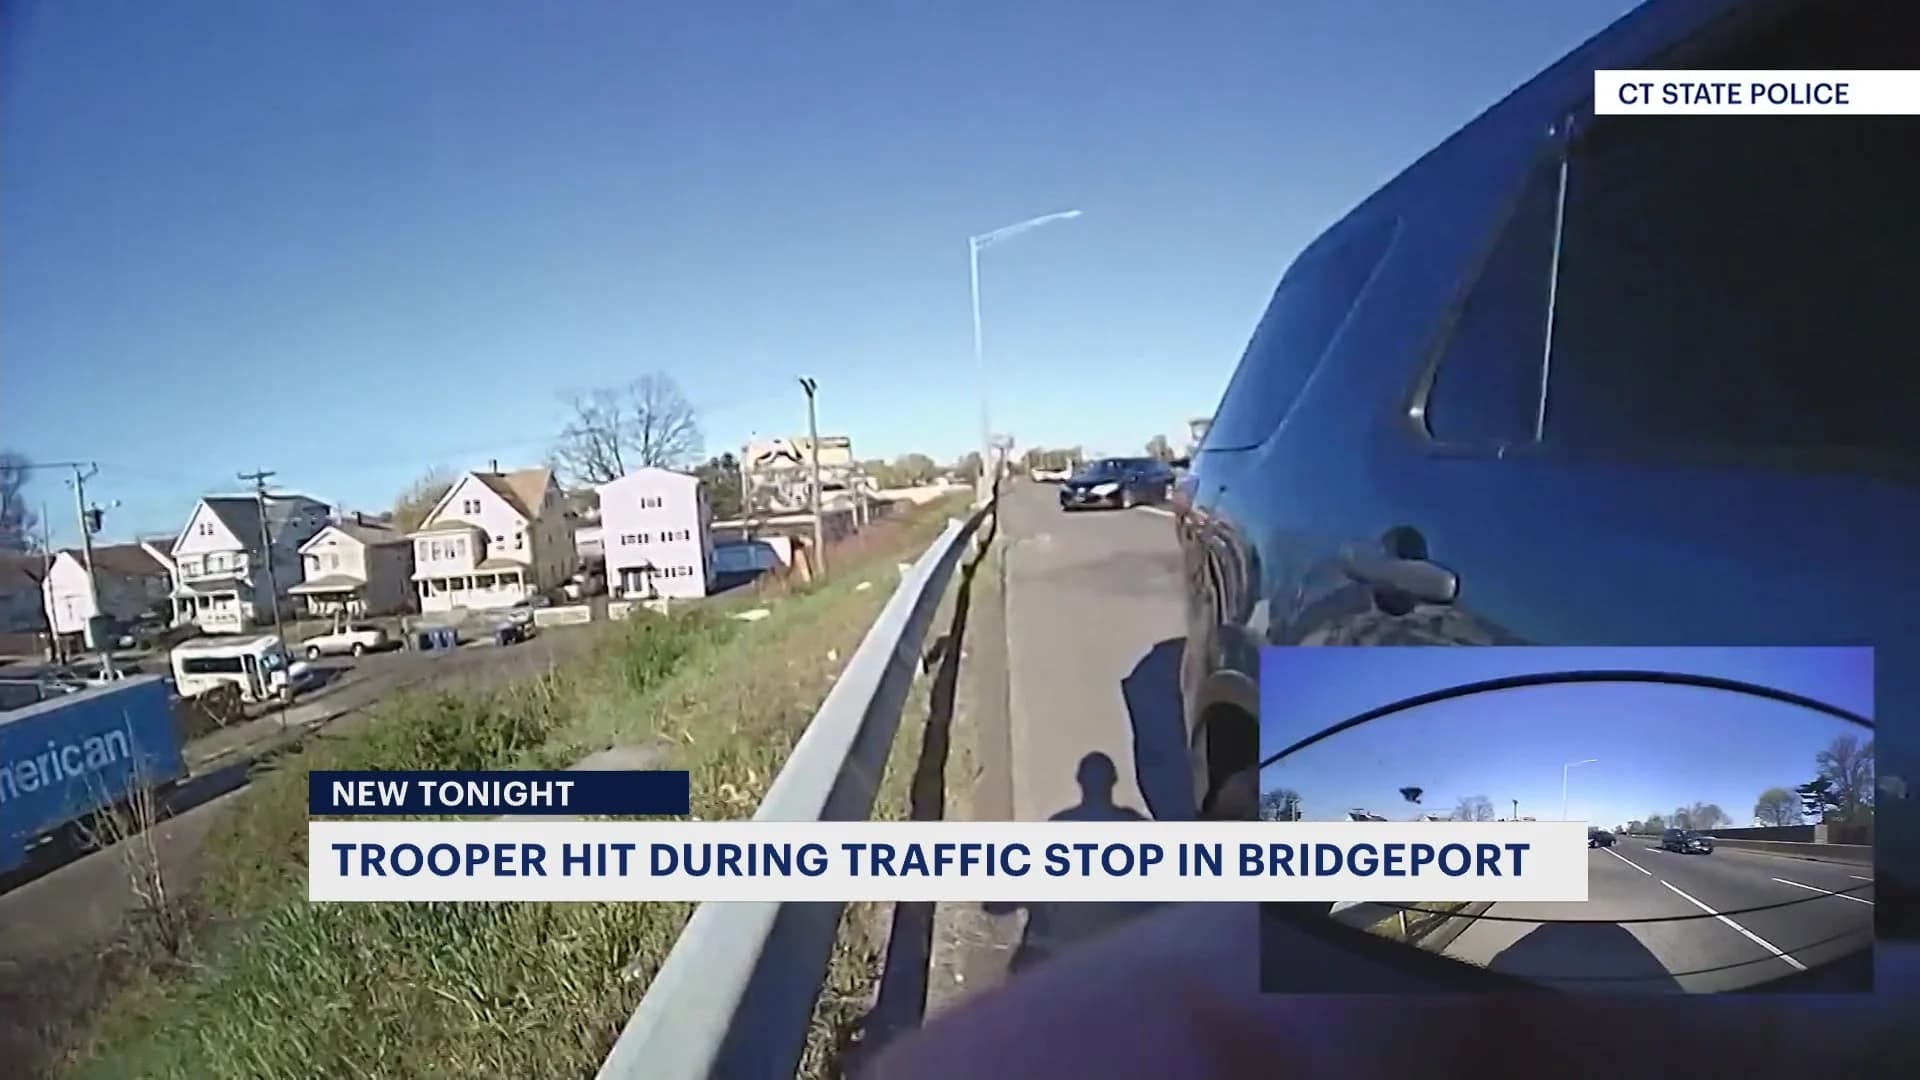 Video released by CSP shows the moment a Connecticut state trooper is struck by a car on I-95 in Bridgeport